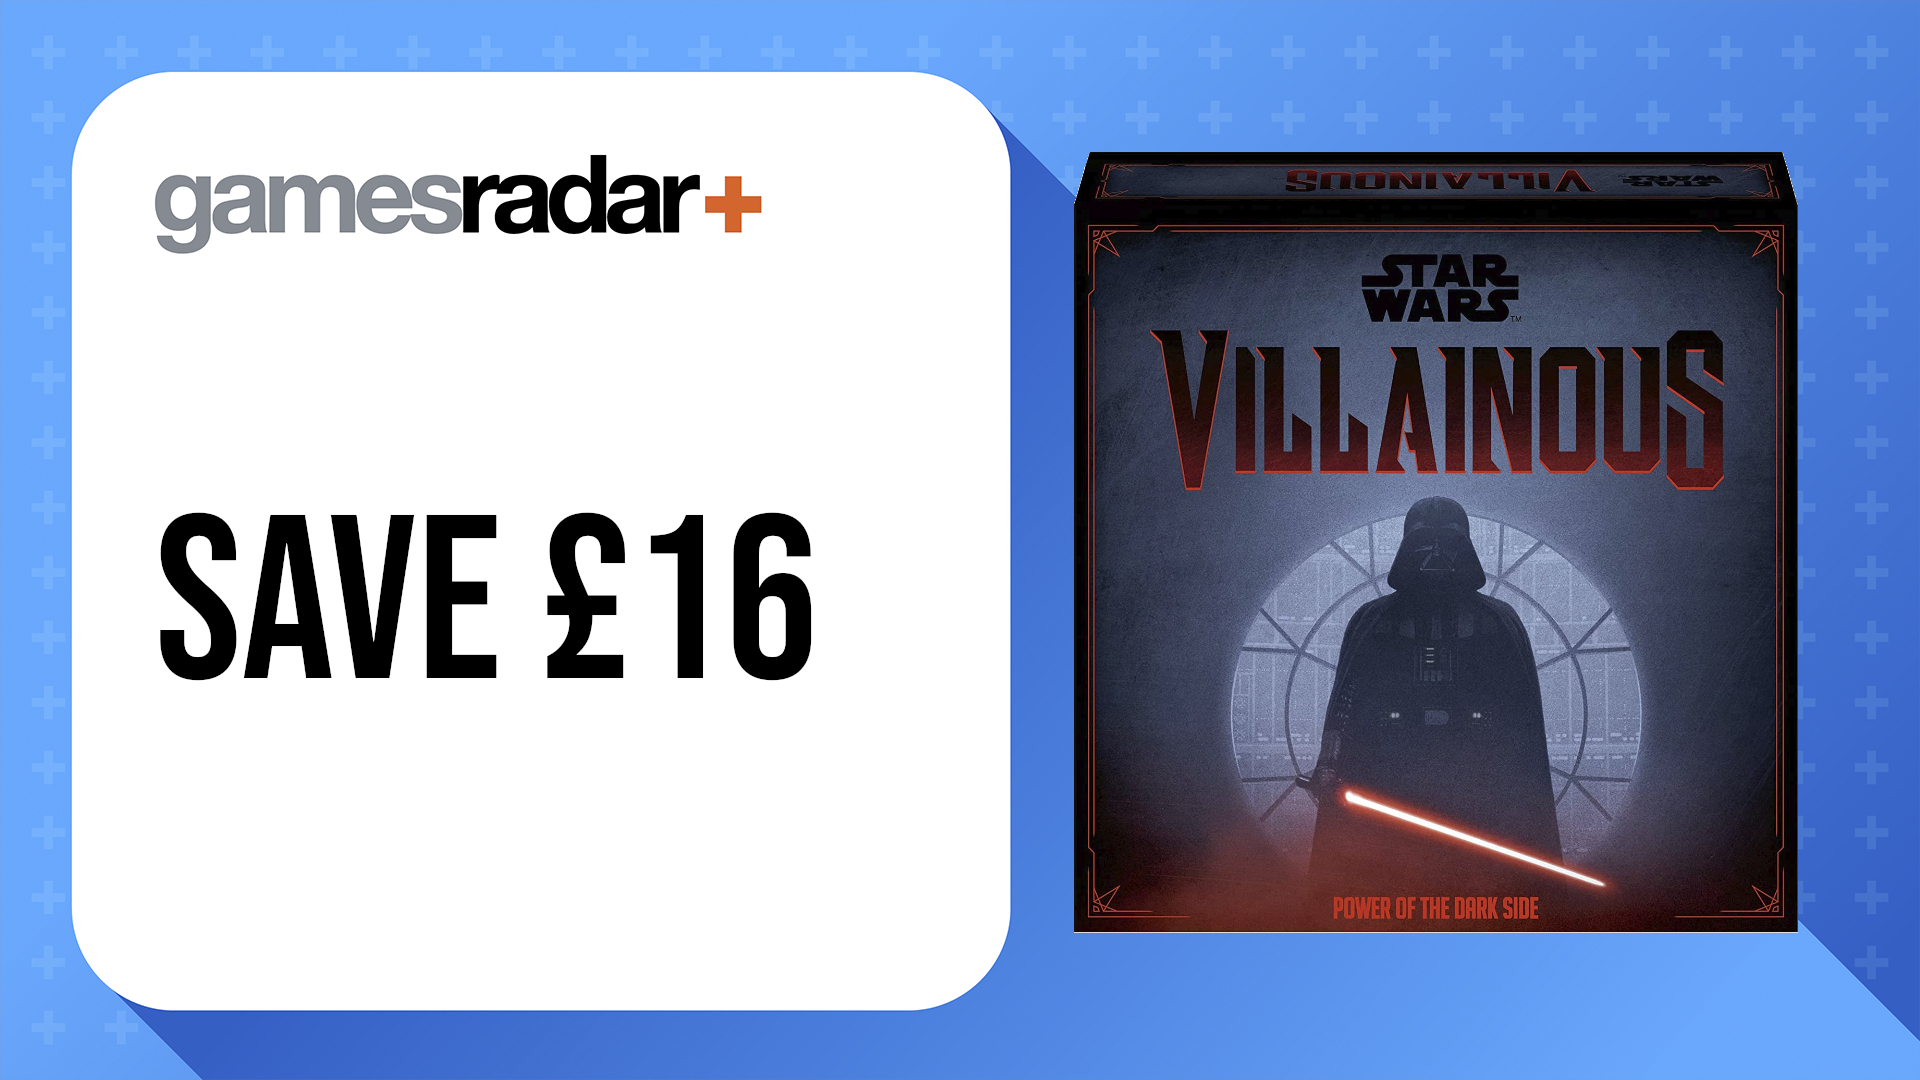 Black Friday board game deals with Star Wars Villainous